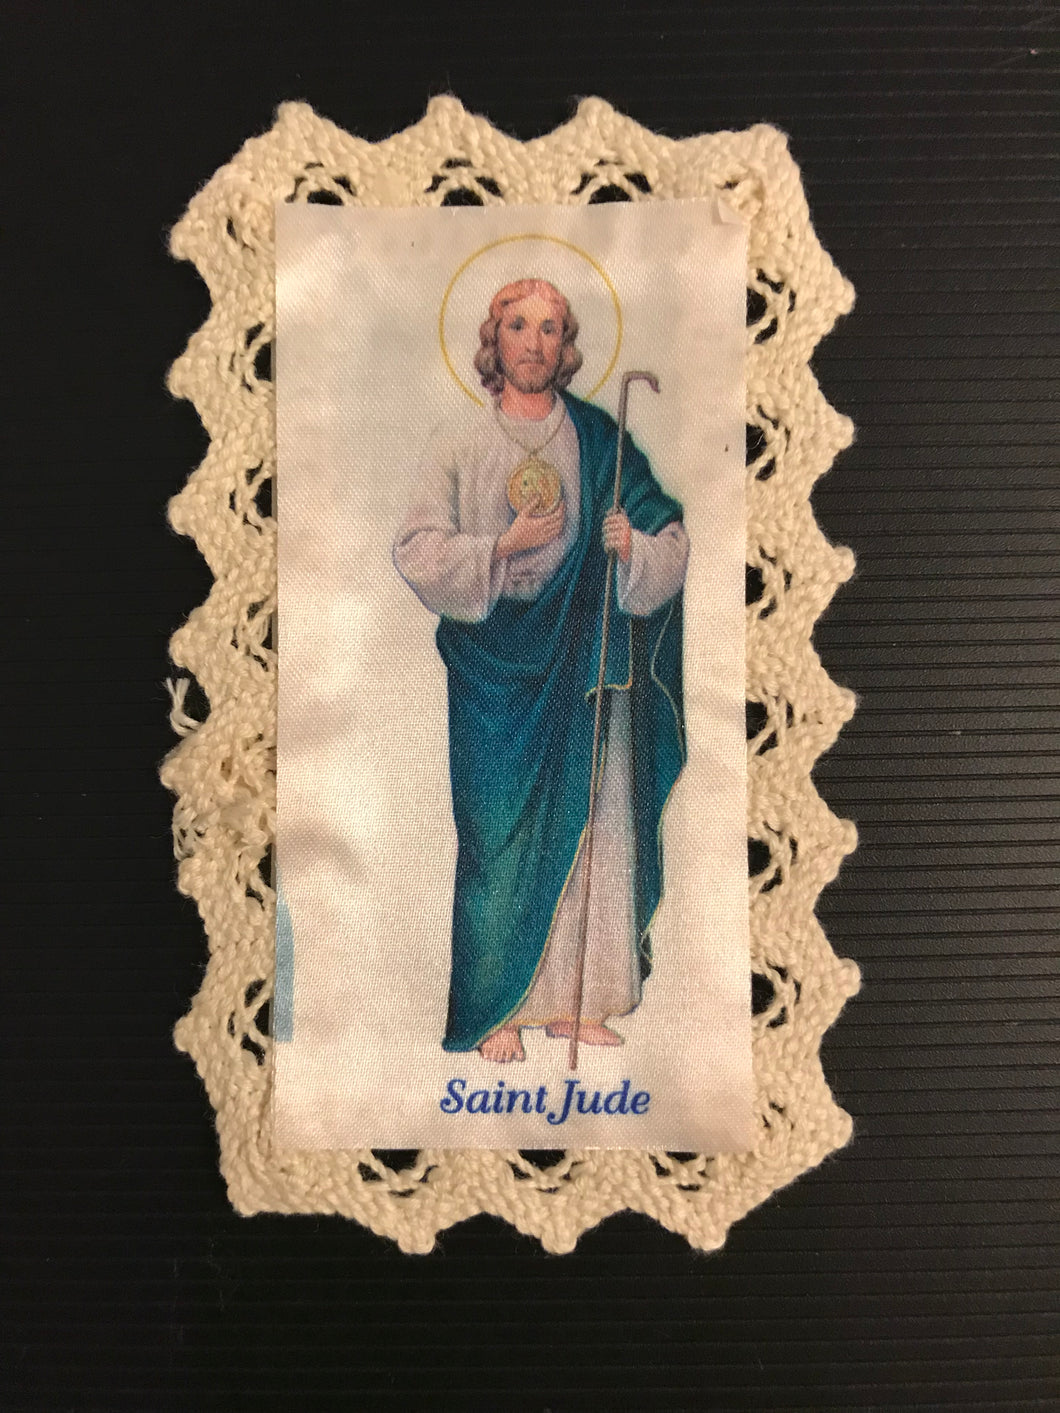 St. Jude Crocheted Lace Holy Card